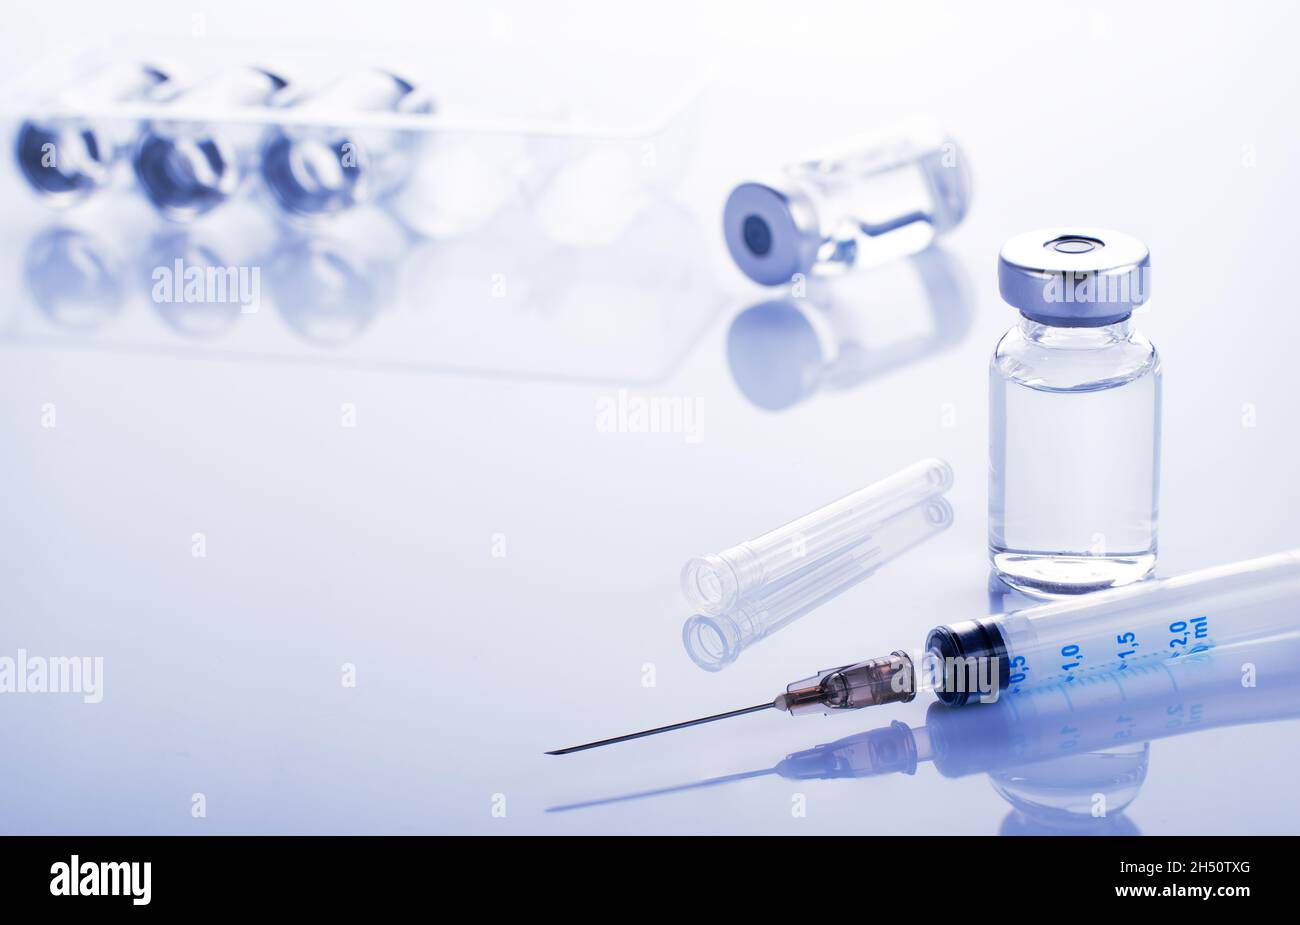 Single use syringe for injection treatment on medical table with vials of liquid drug doses flu shots at background. Vaccination or immunization care Stock Photo